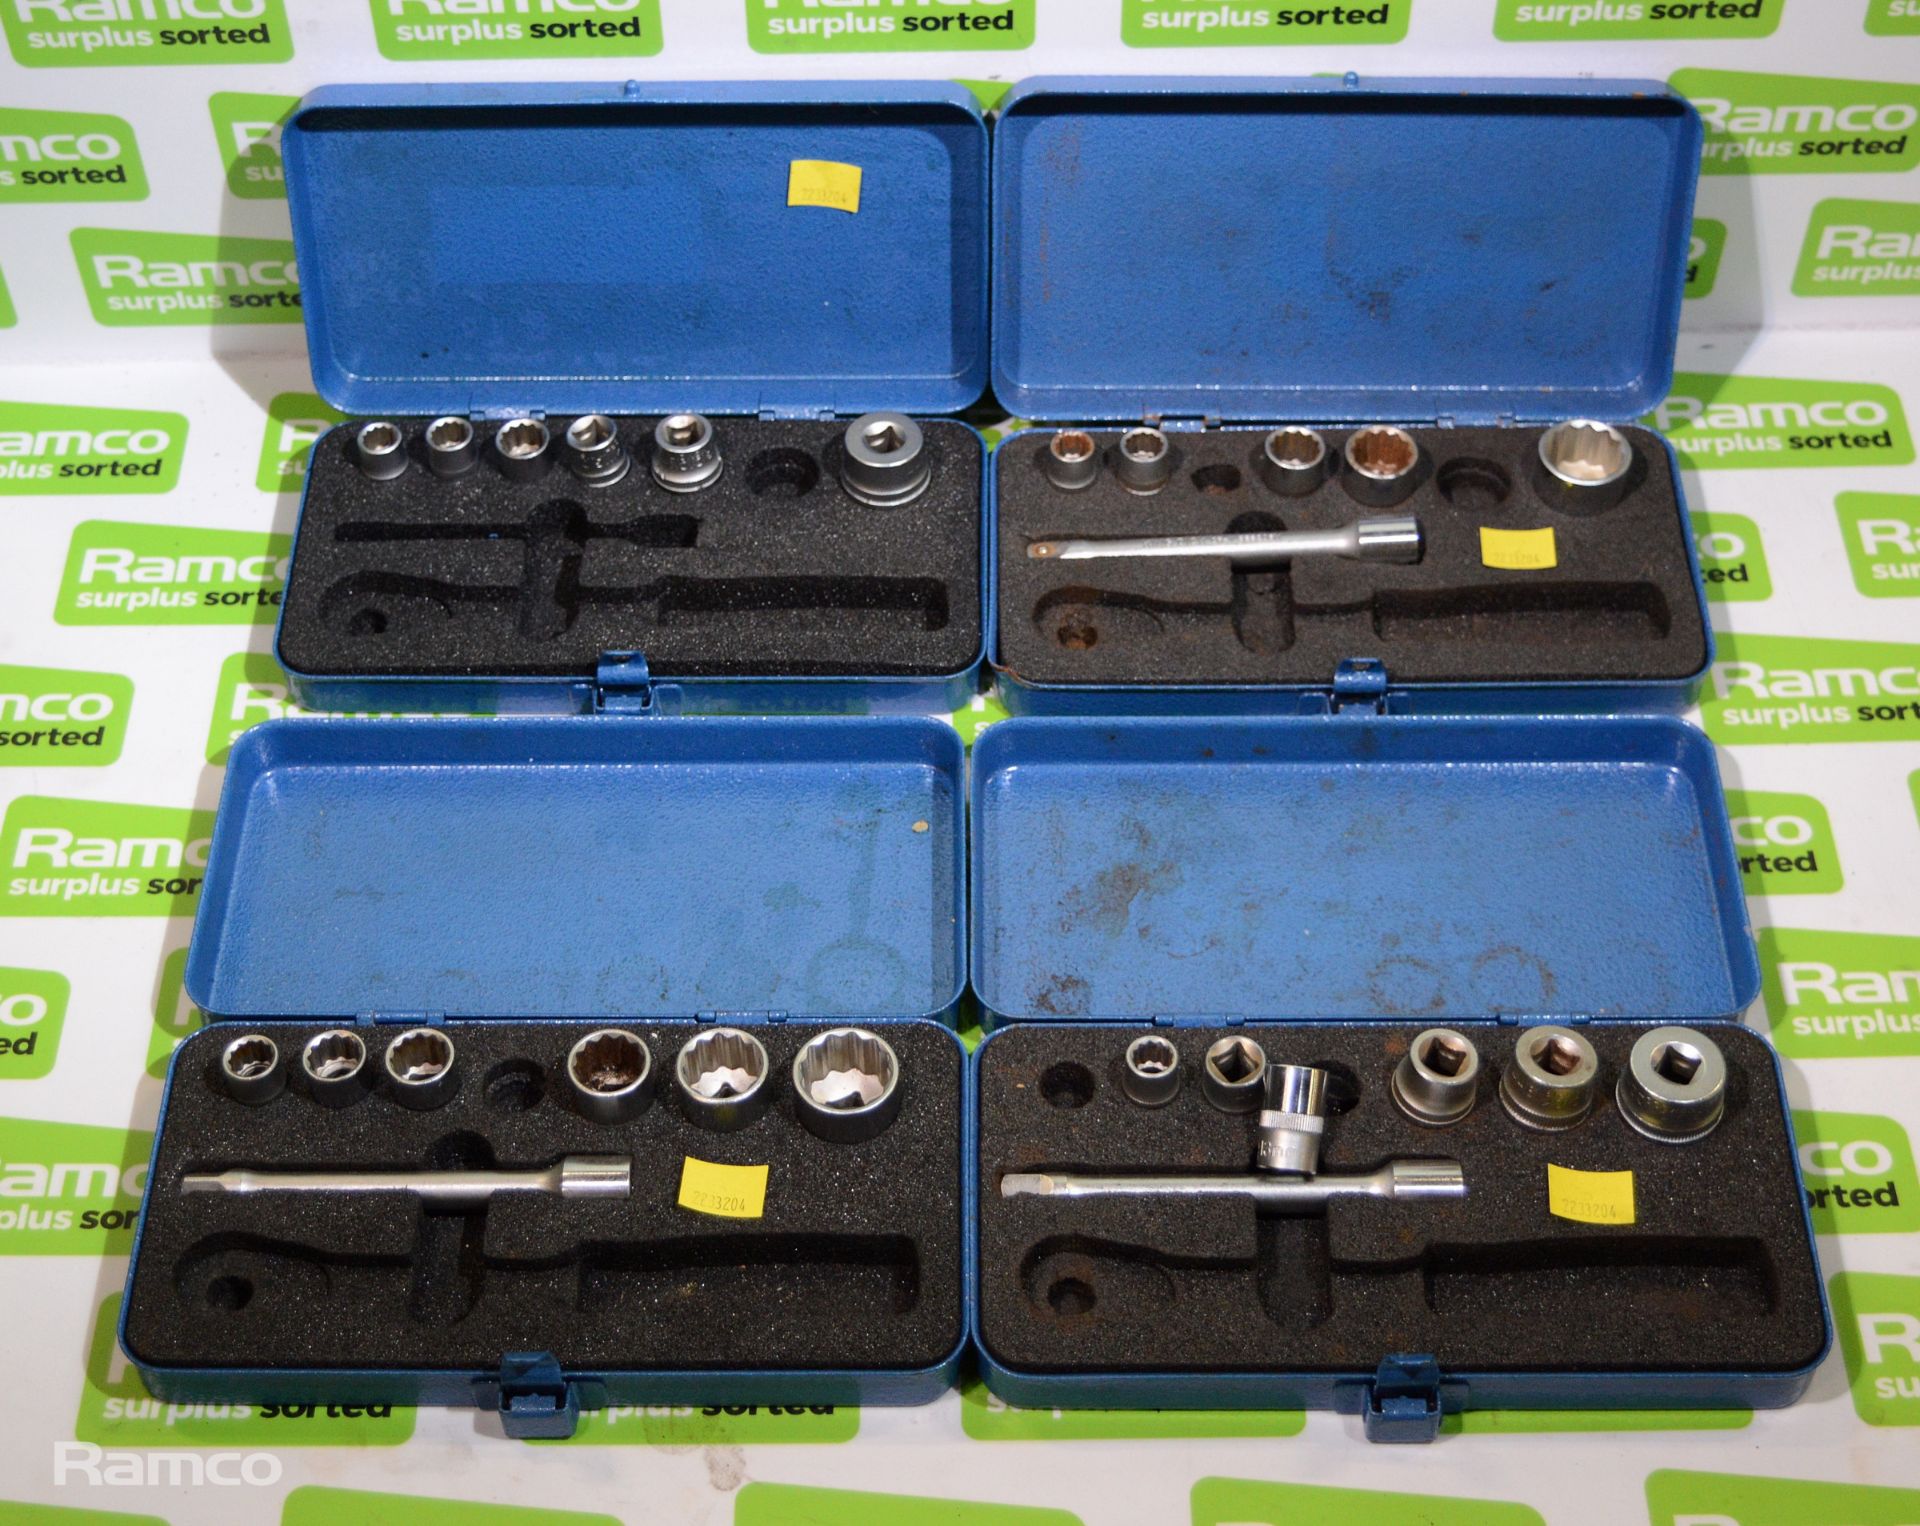 4x King Dick metric 3/8 inch wrench socket sets - all incomplete